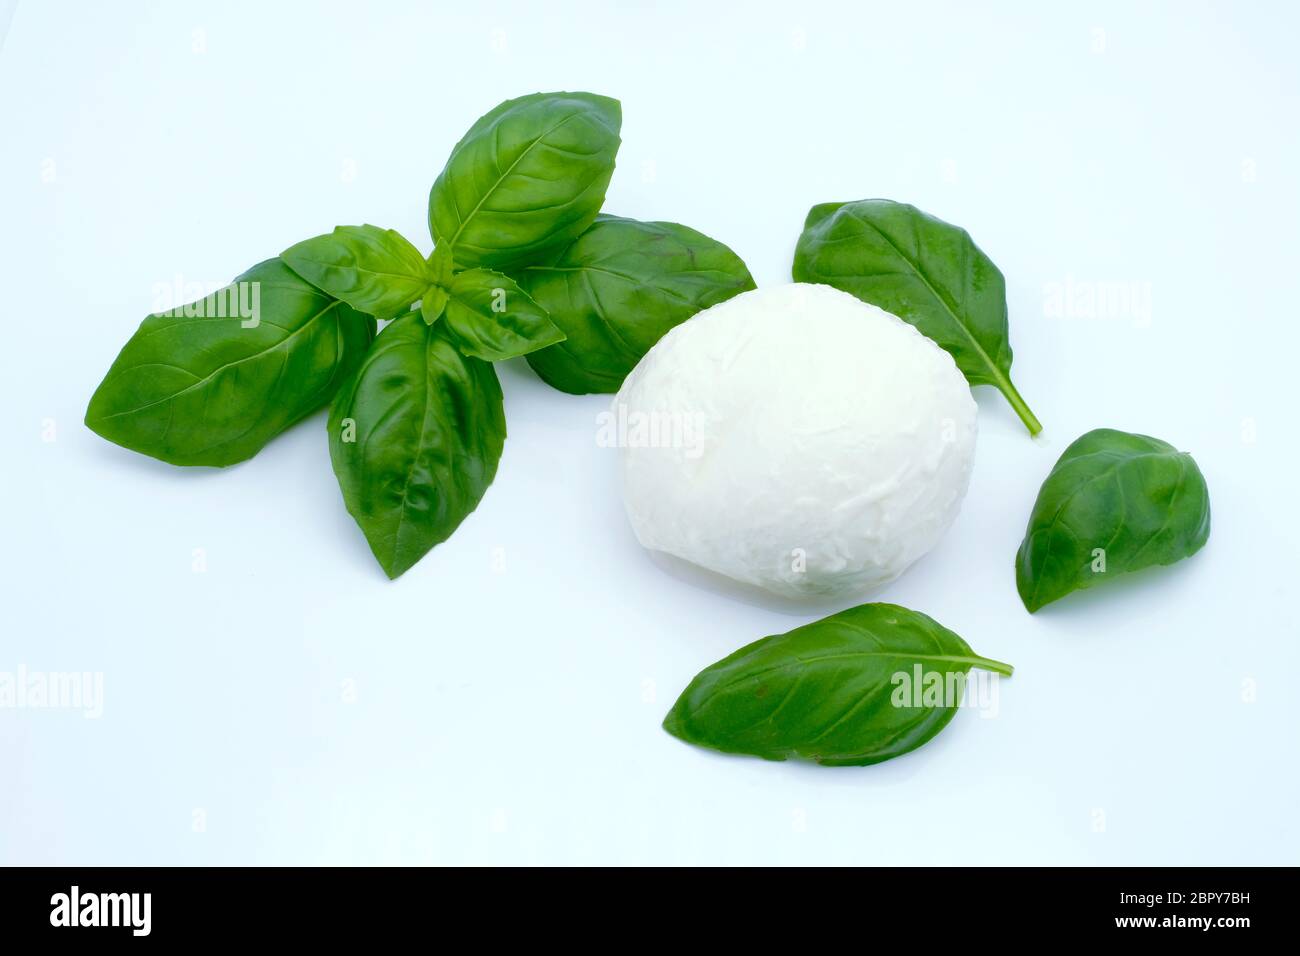 A Ball of Mozzarella Cheese with Basil Leaves Stock Photo